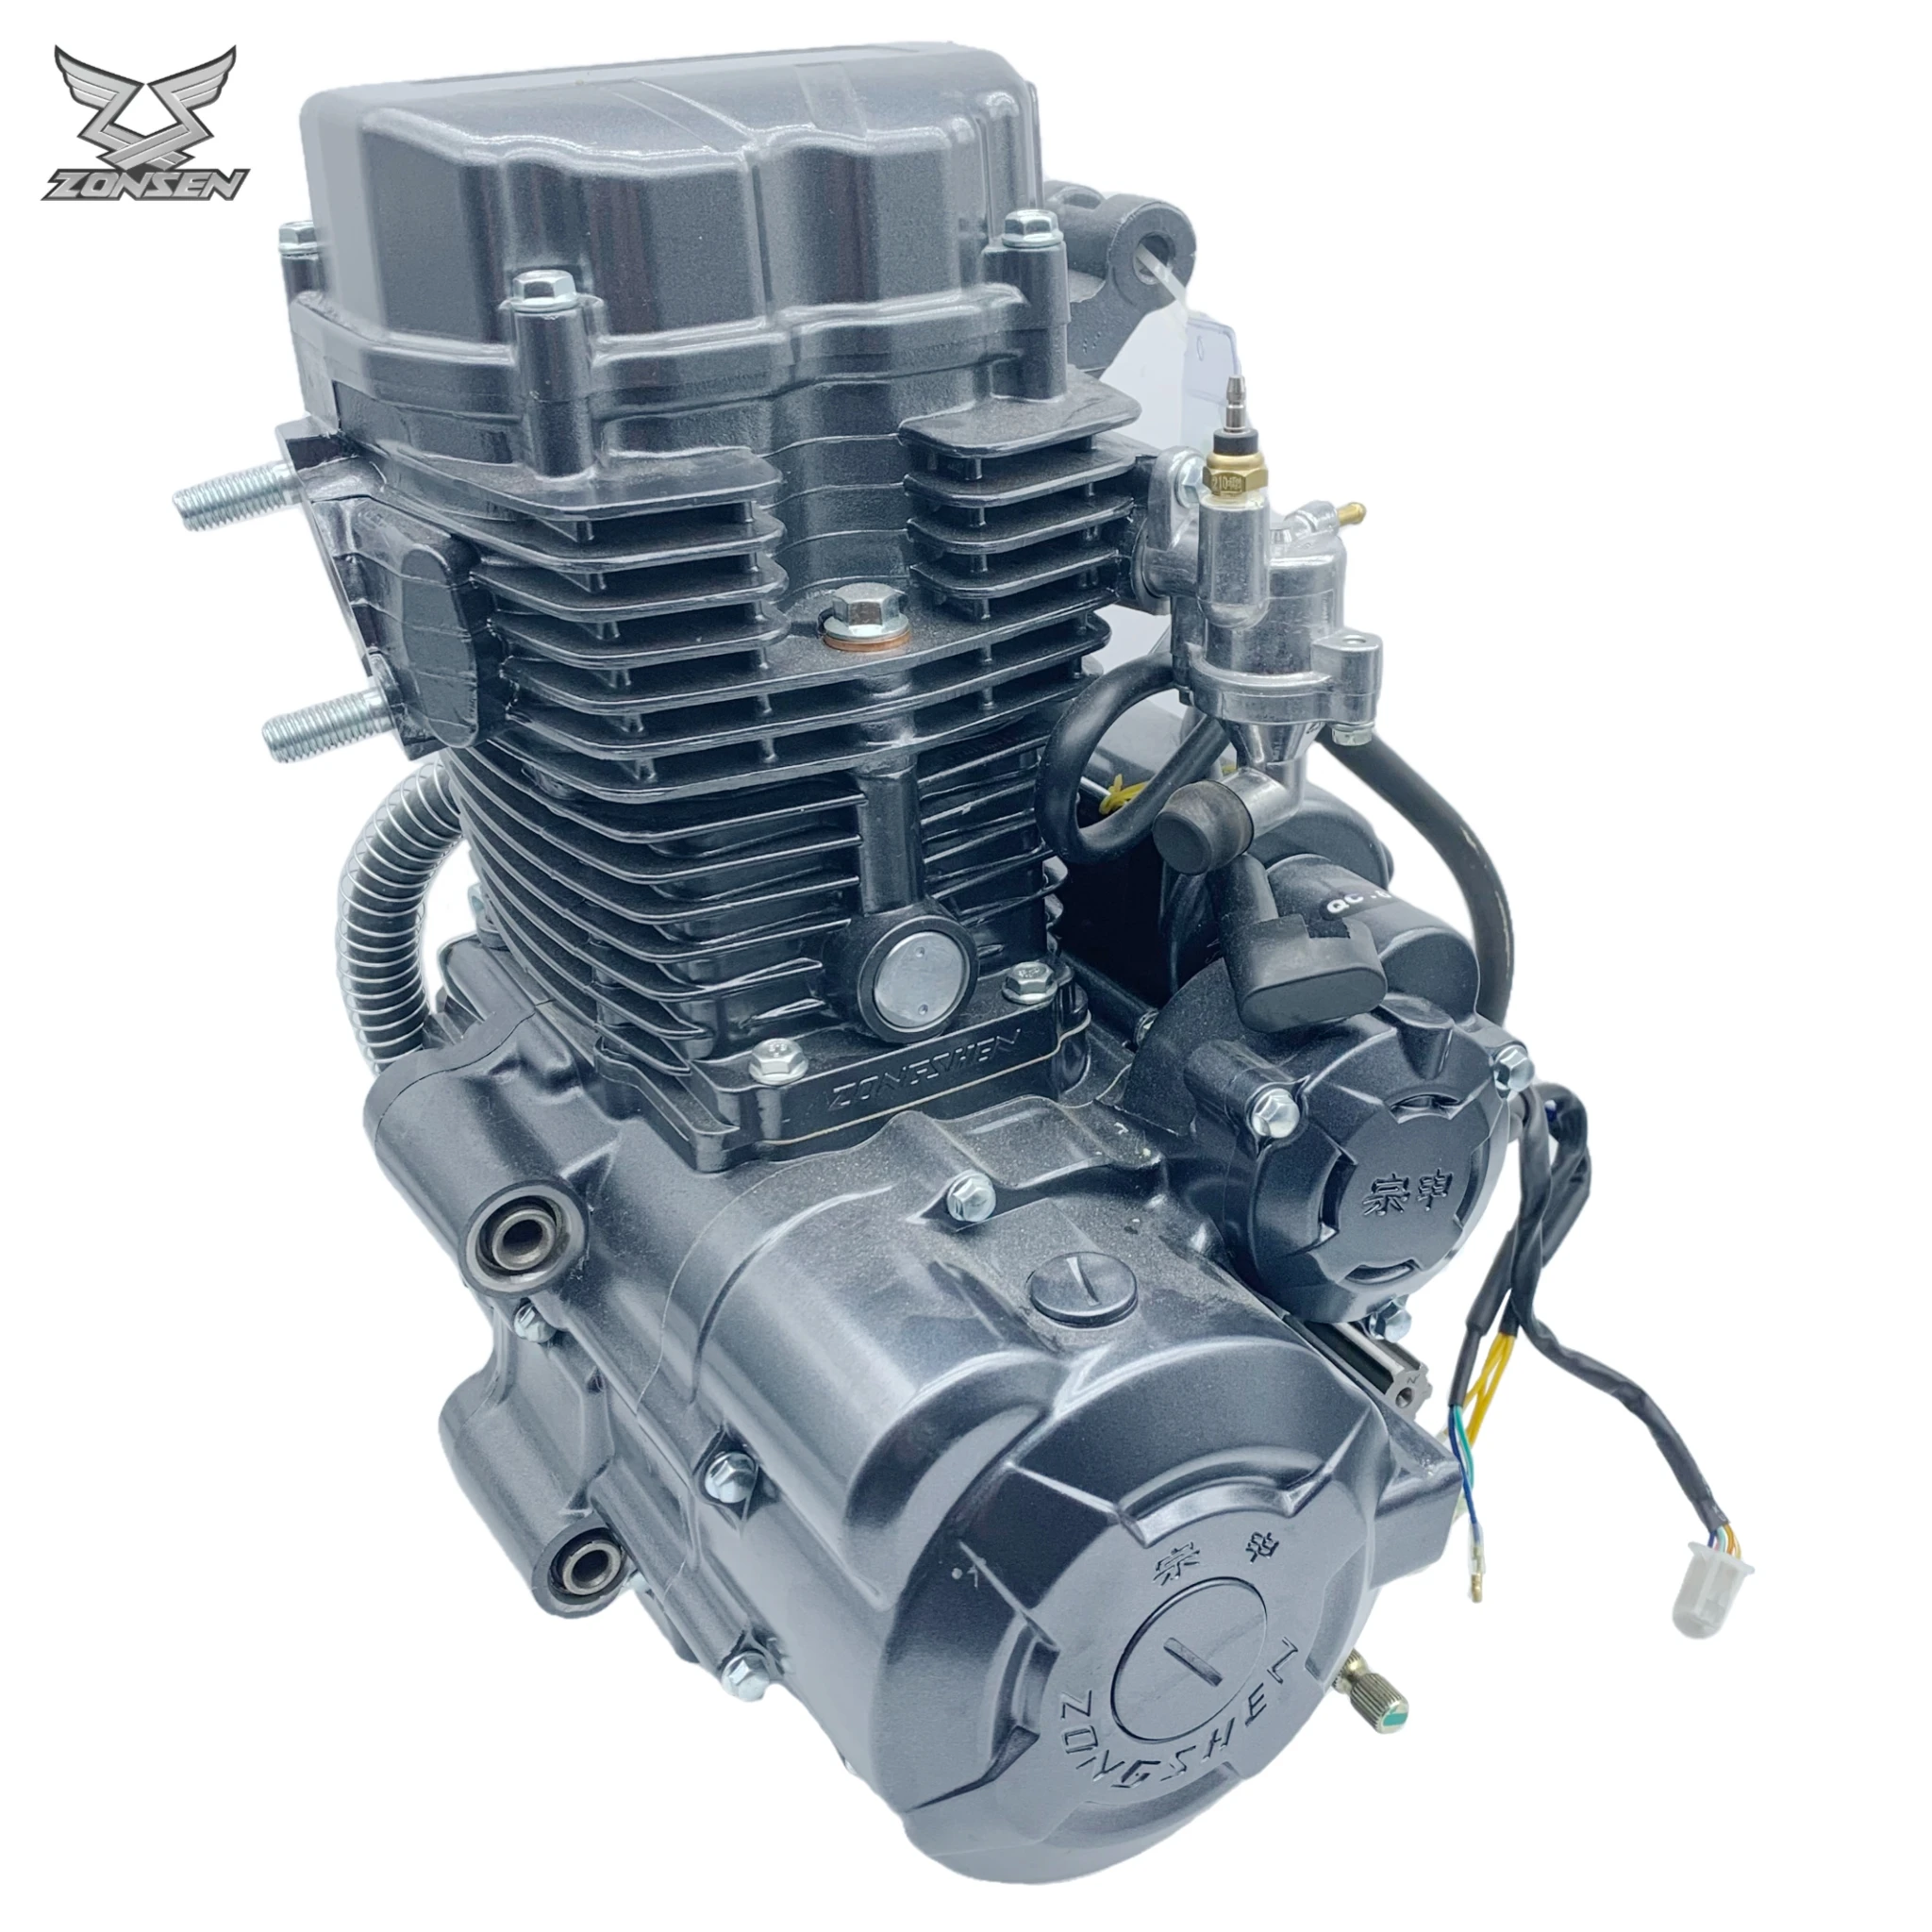 Zongshen engine tsunami water-cooled 200cc-A three-wheeled motorcycle motorized tricycles Zongshen 200cc water-cooled engine